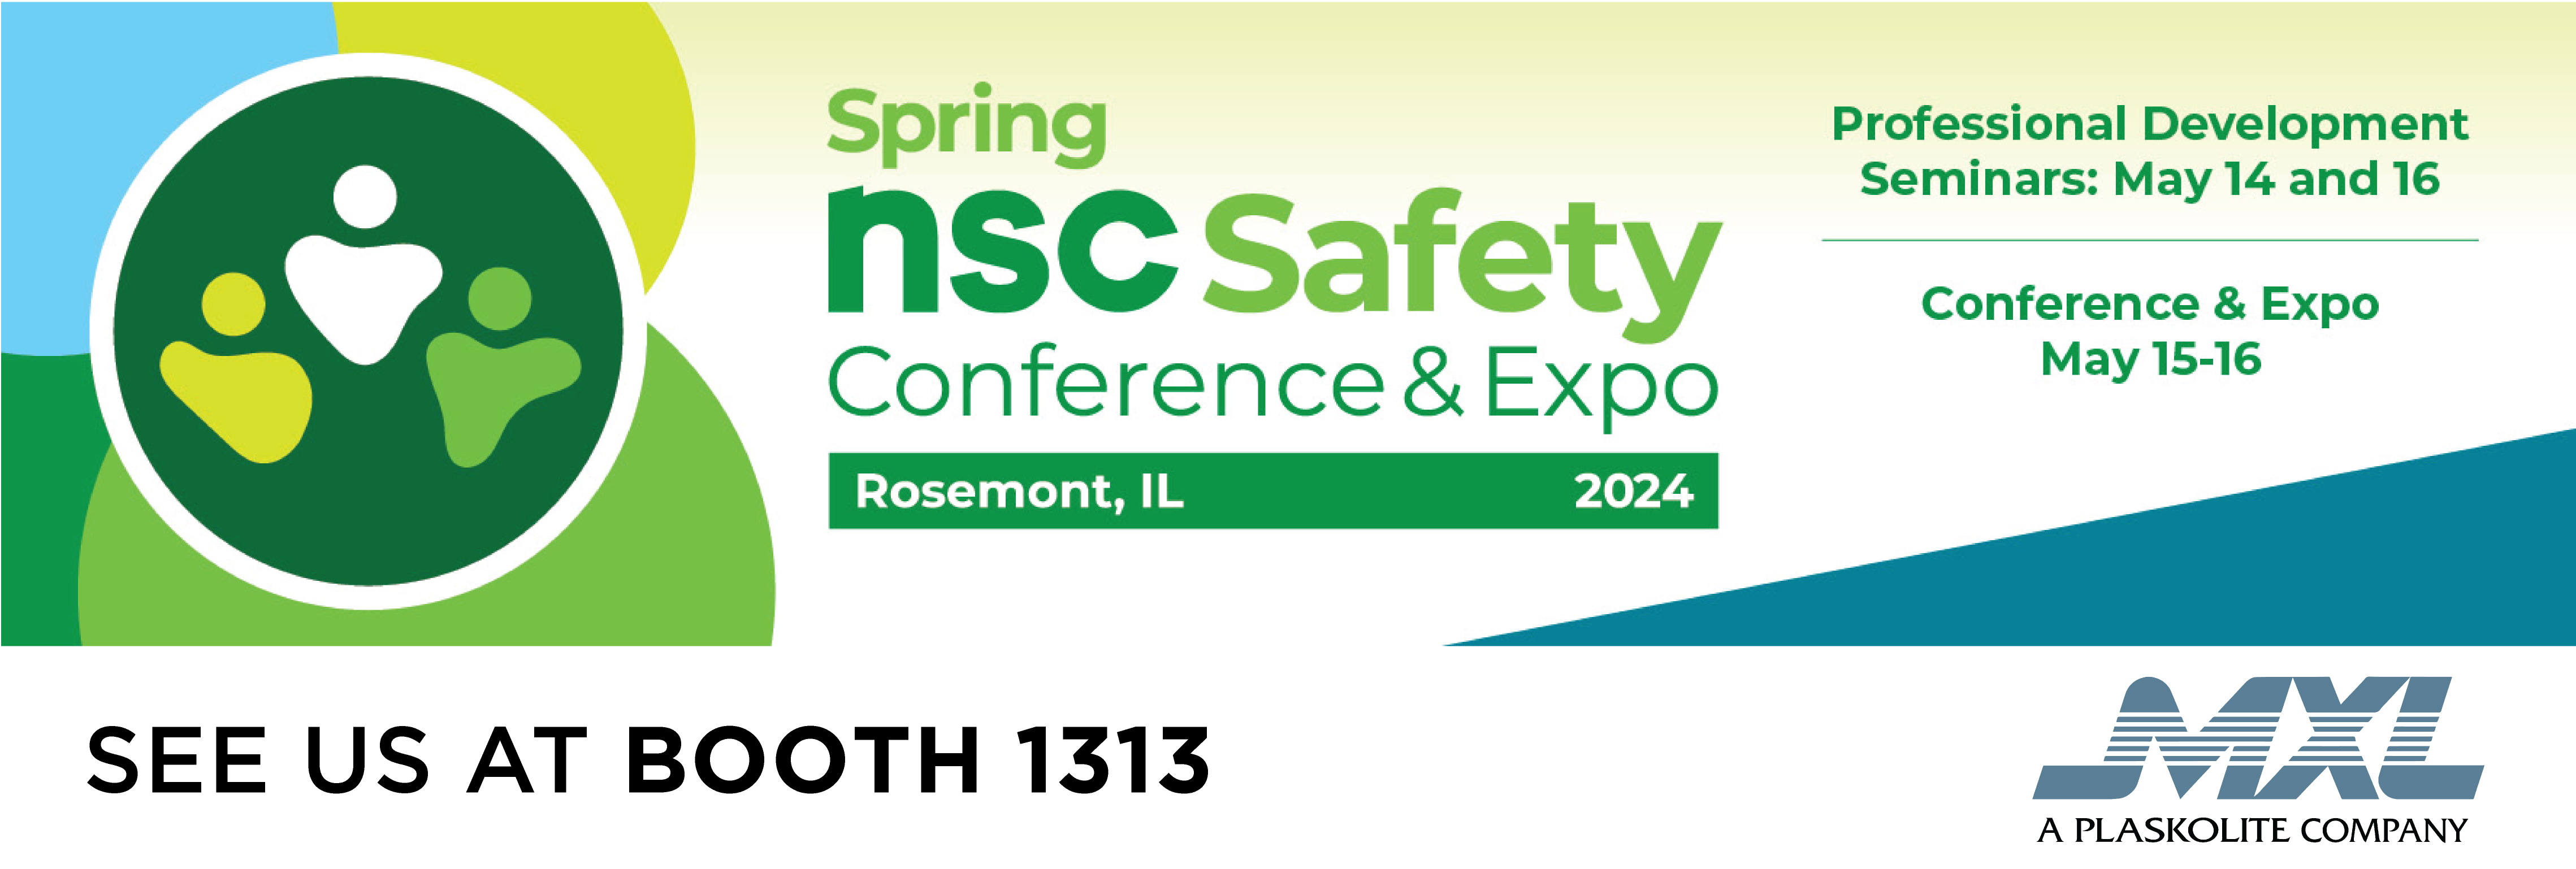 2024 Spring NSC Conference and Expo